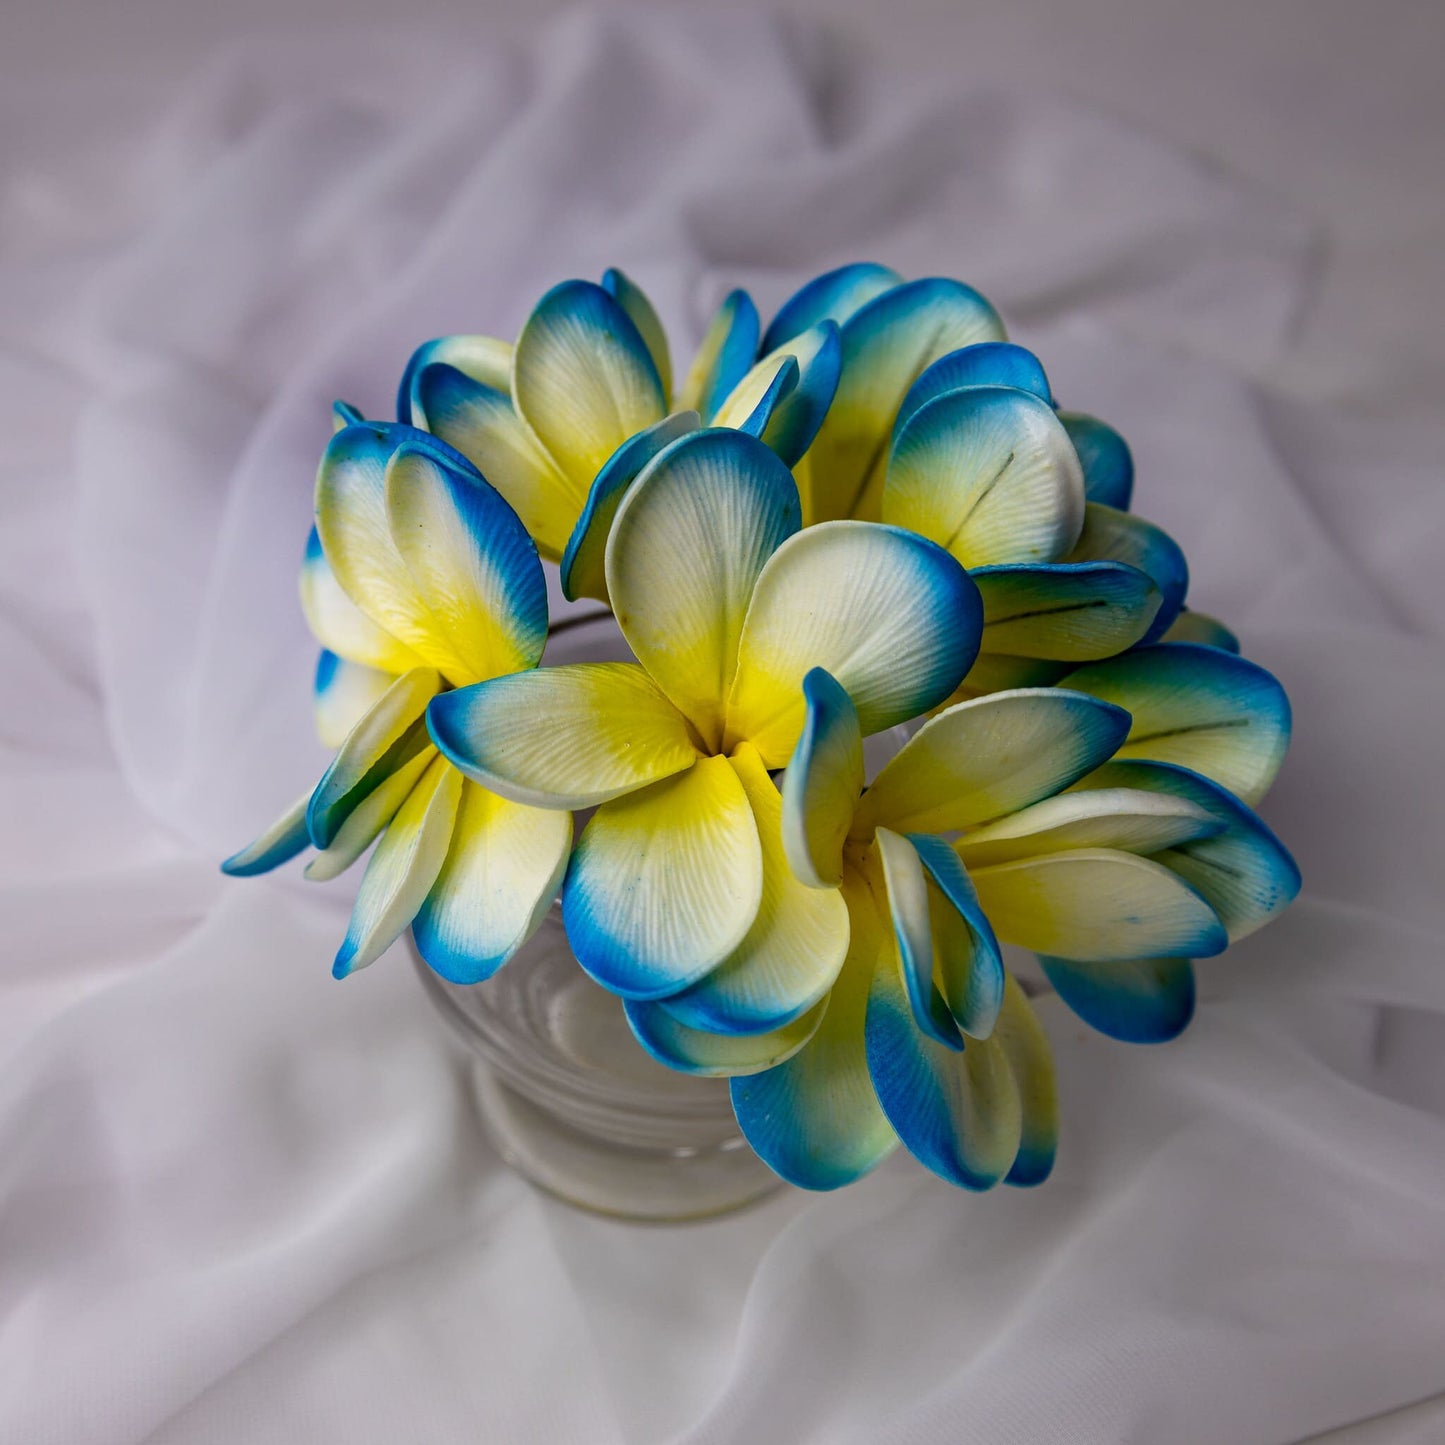 artificial skye blue frangipani flowers placed in transparent glass vase